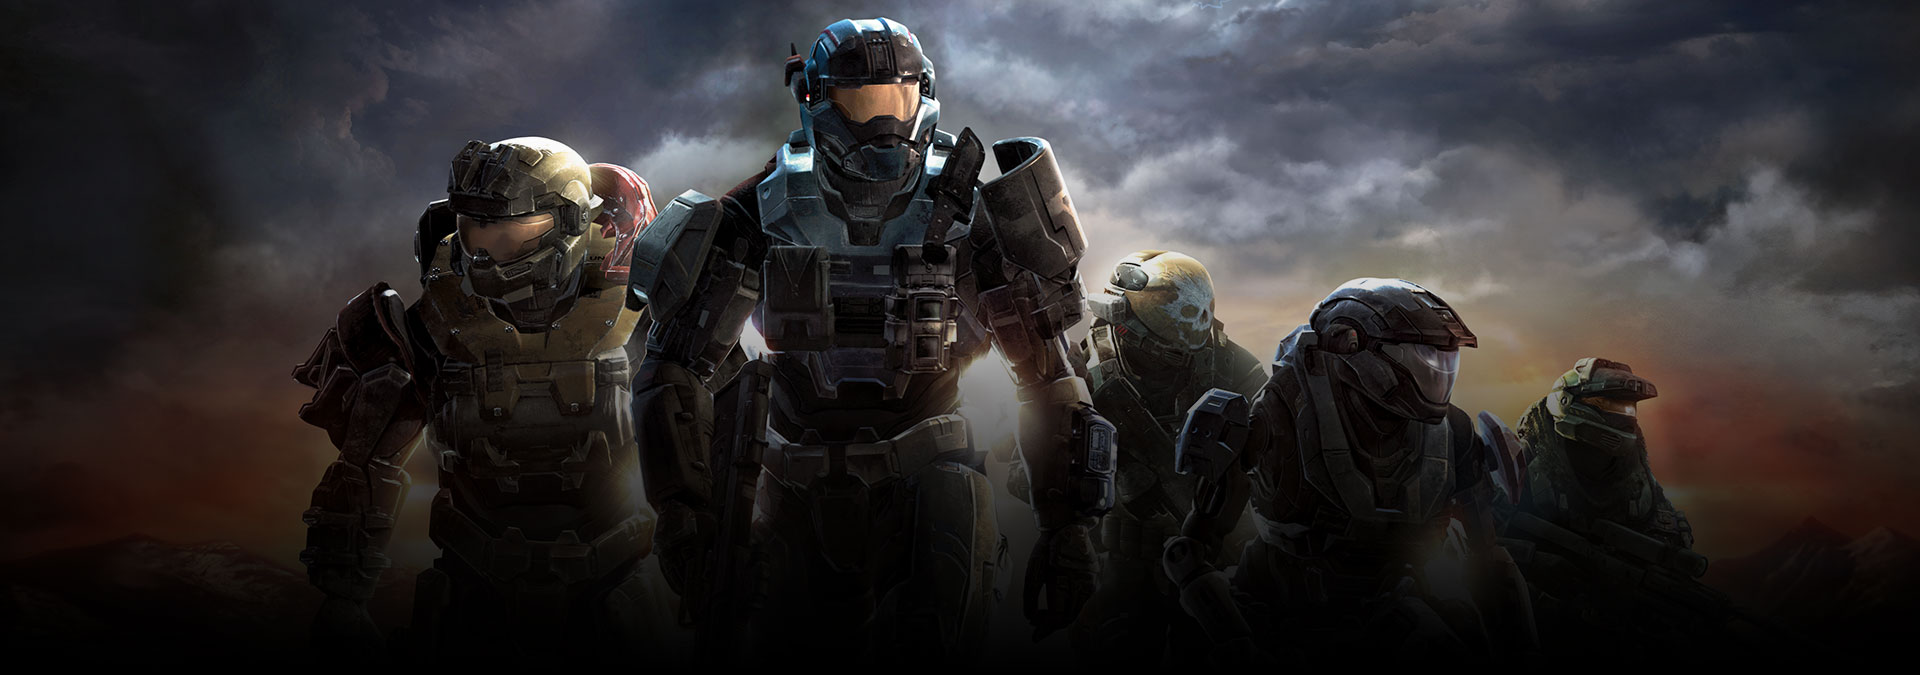 Halo: Reach version for PC